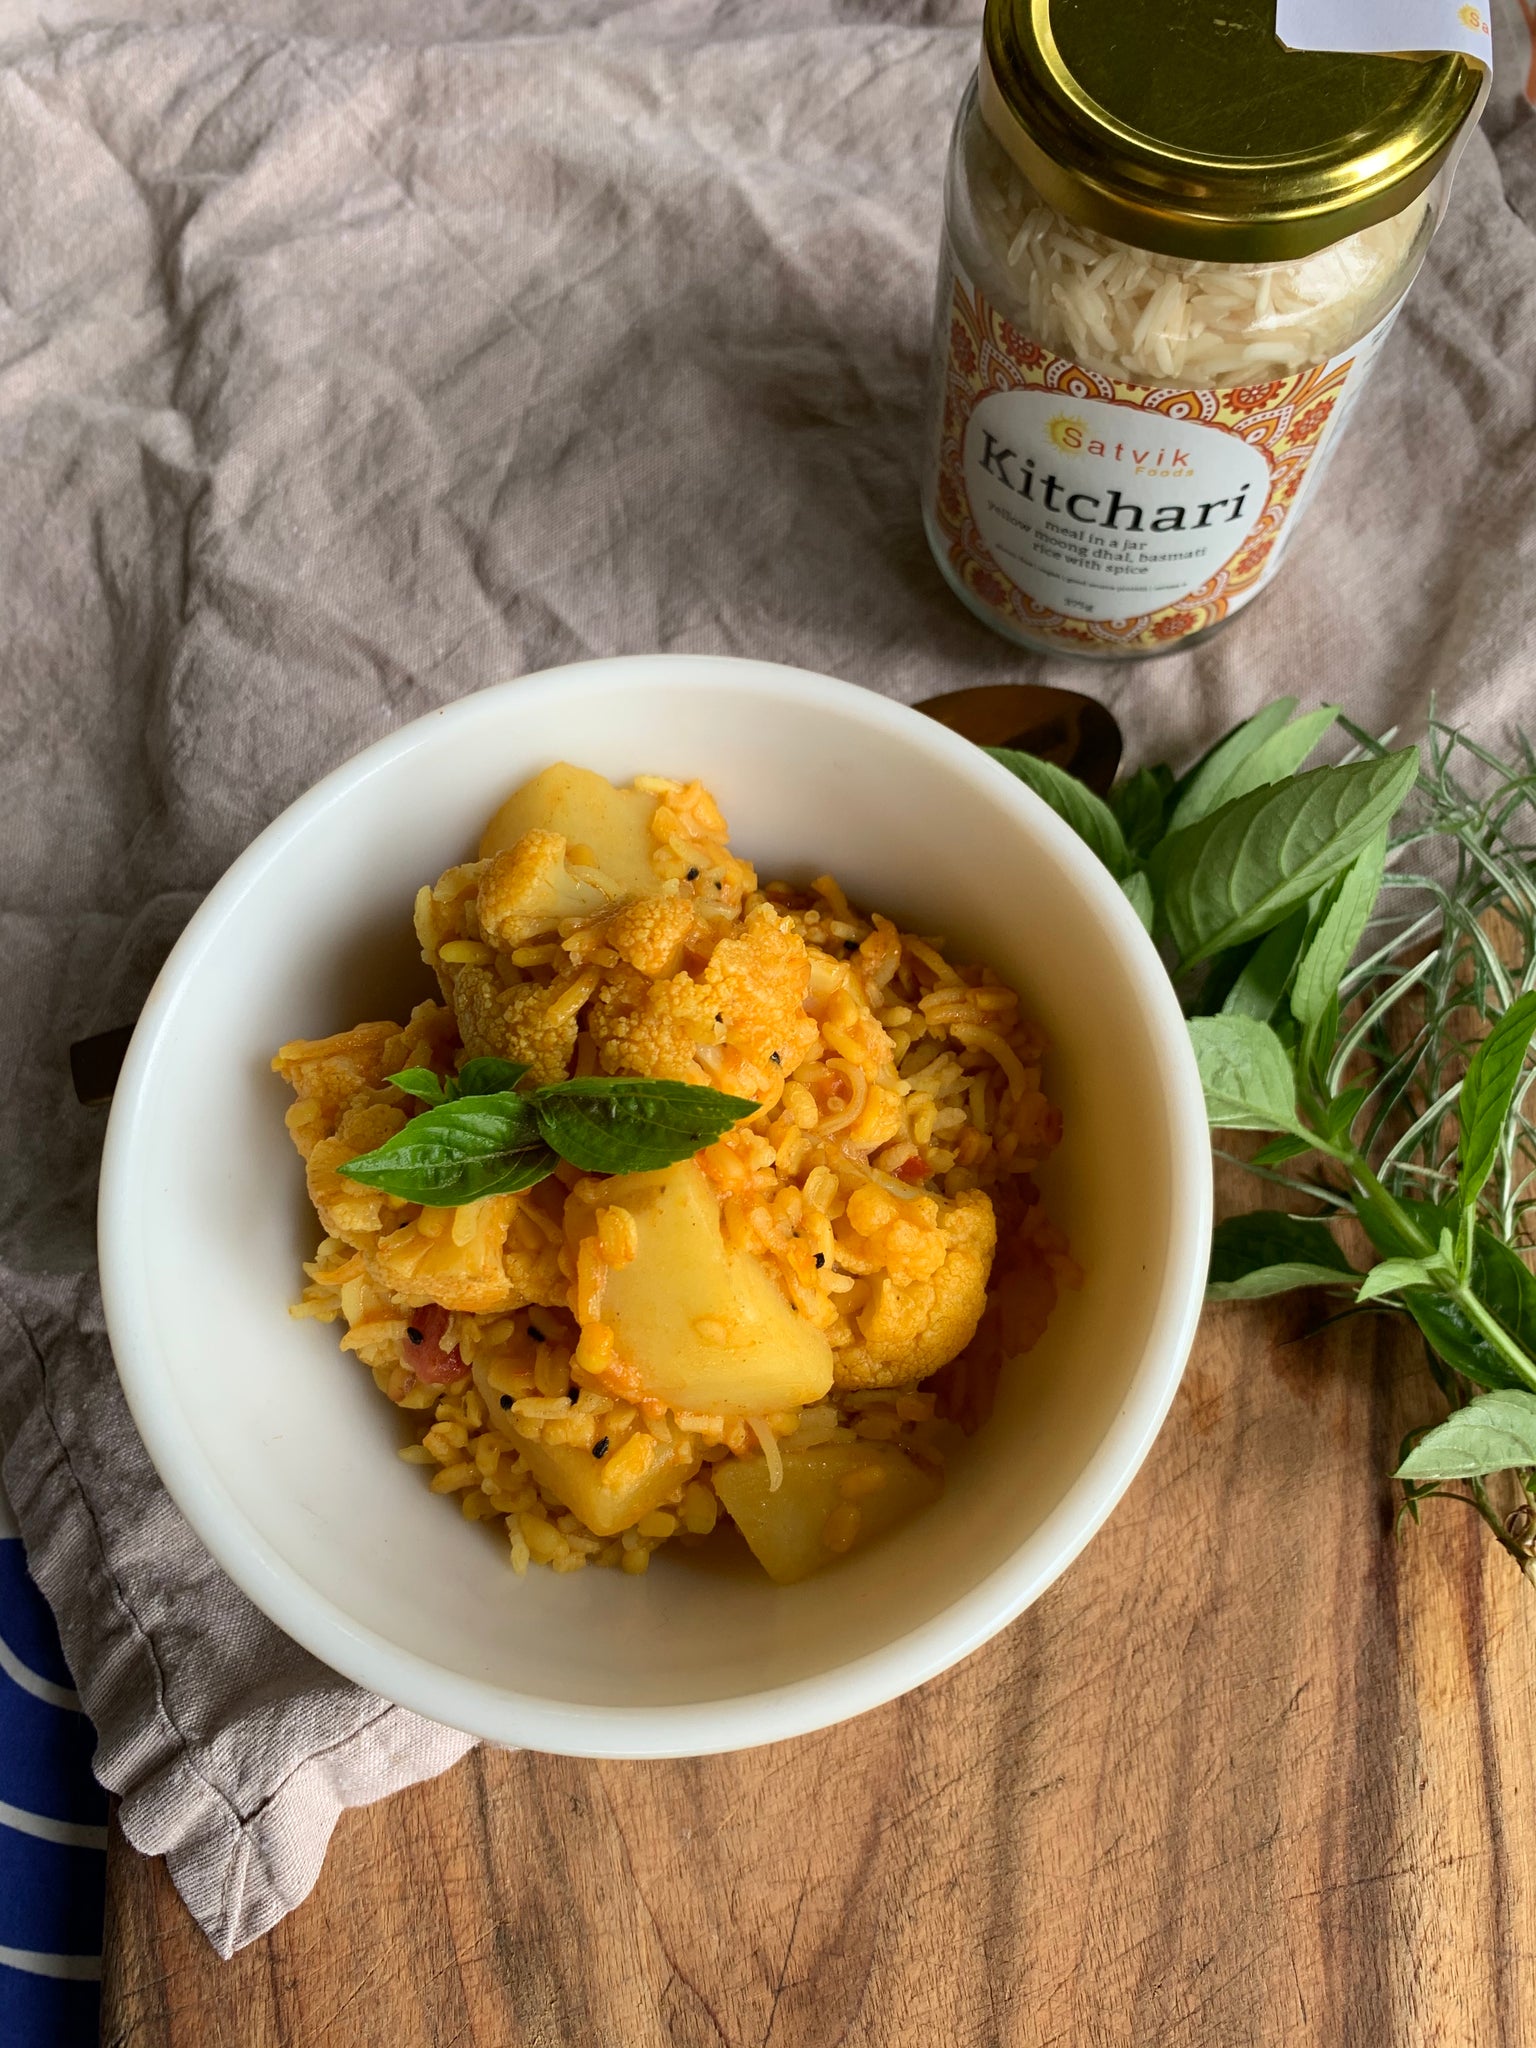 simple healthy and most importantly delicious, Satvik foods kitchari features our unique Ayurvedic spice blend with basmati rice and yellow moong dhal, together creating a complete protein.